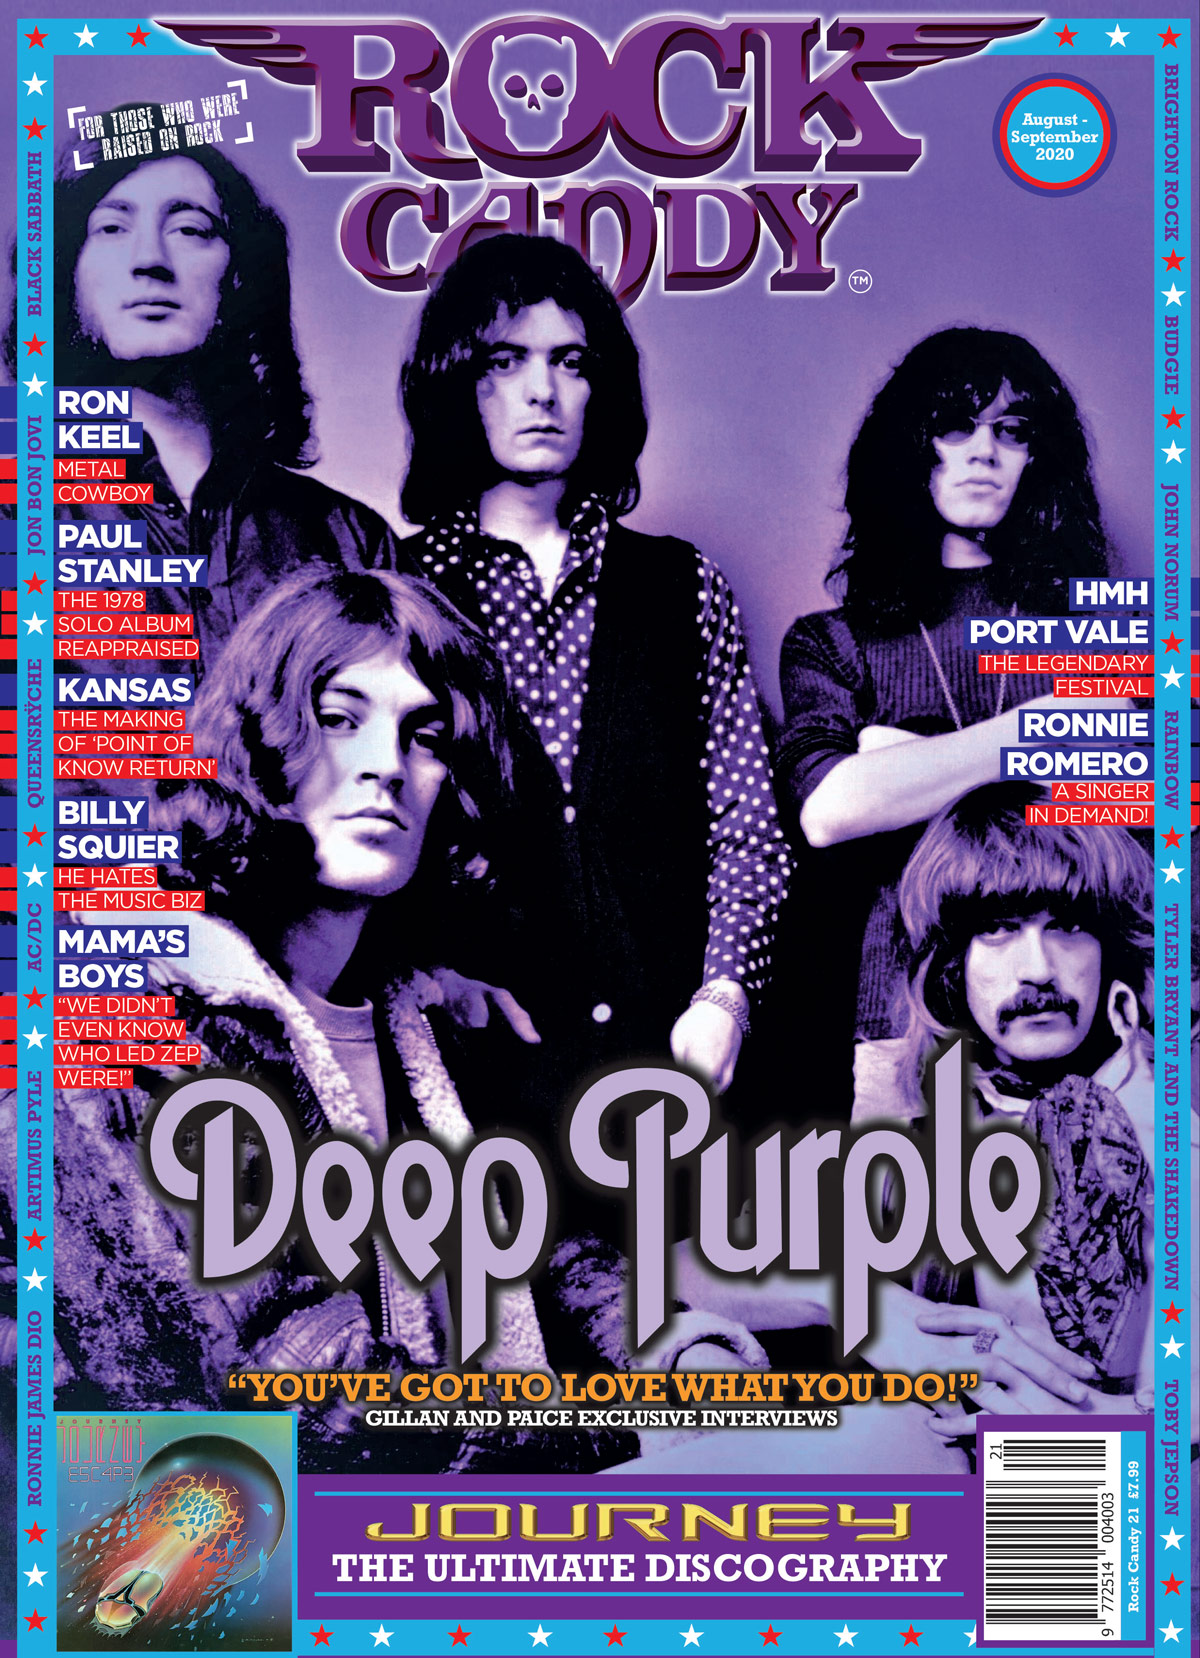 Issue 21 is available right now, featuring our fabulous cover of Deep Purple.